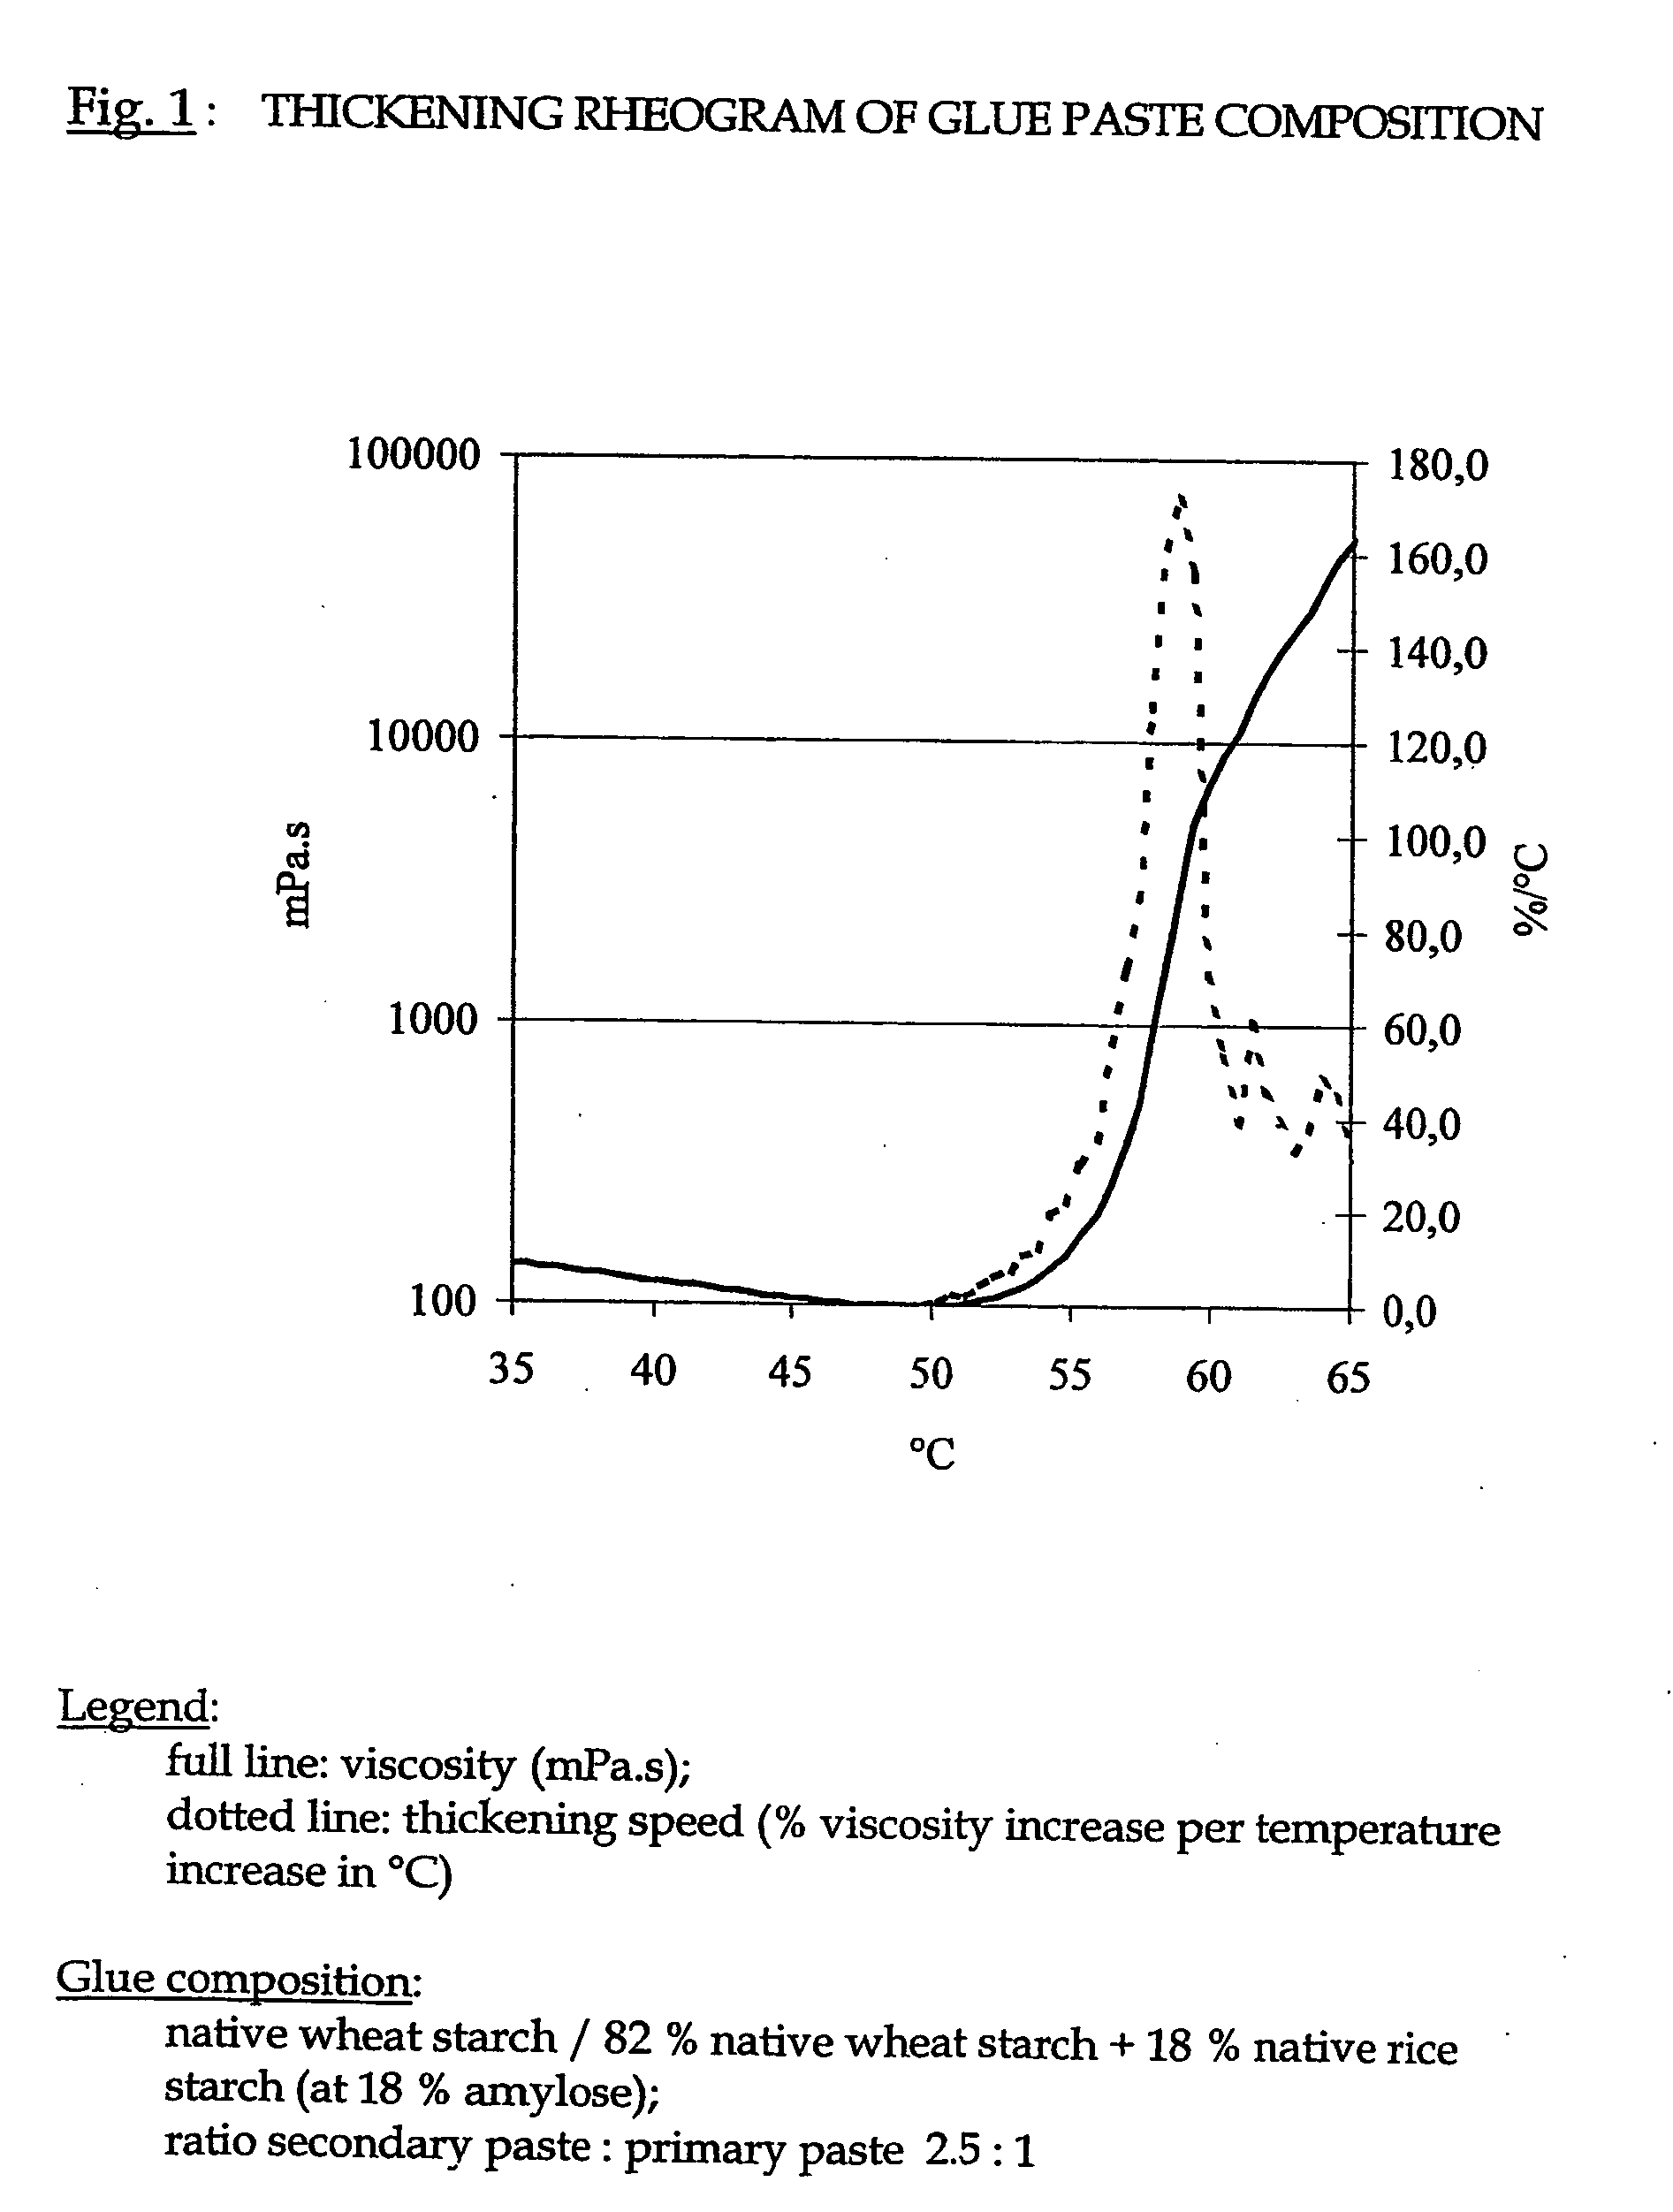 Starch-based glue paste compositions